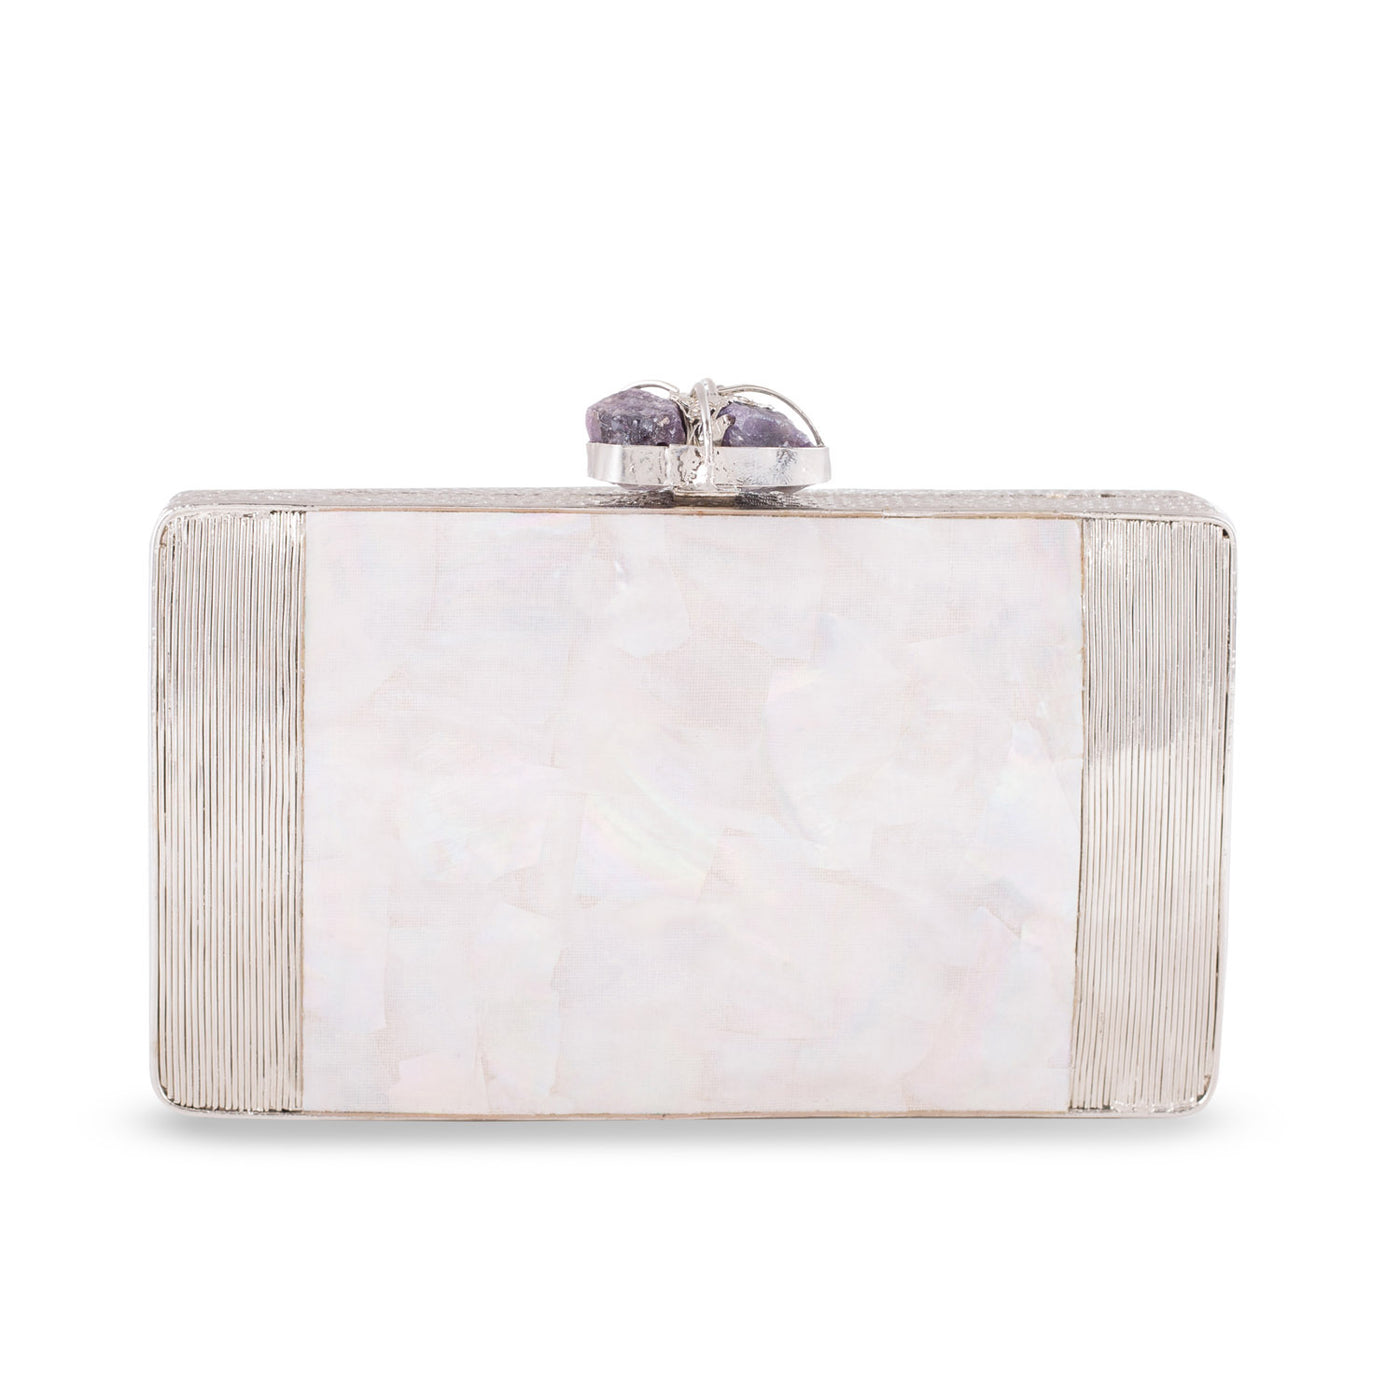 Lines Silver Clutch - Reversible clutch bag for women